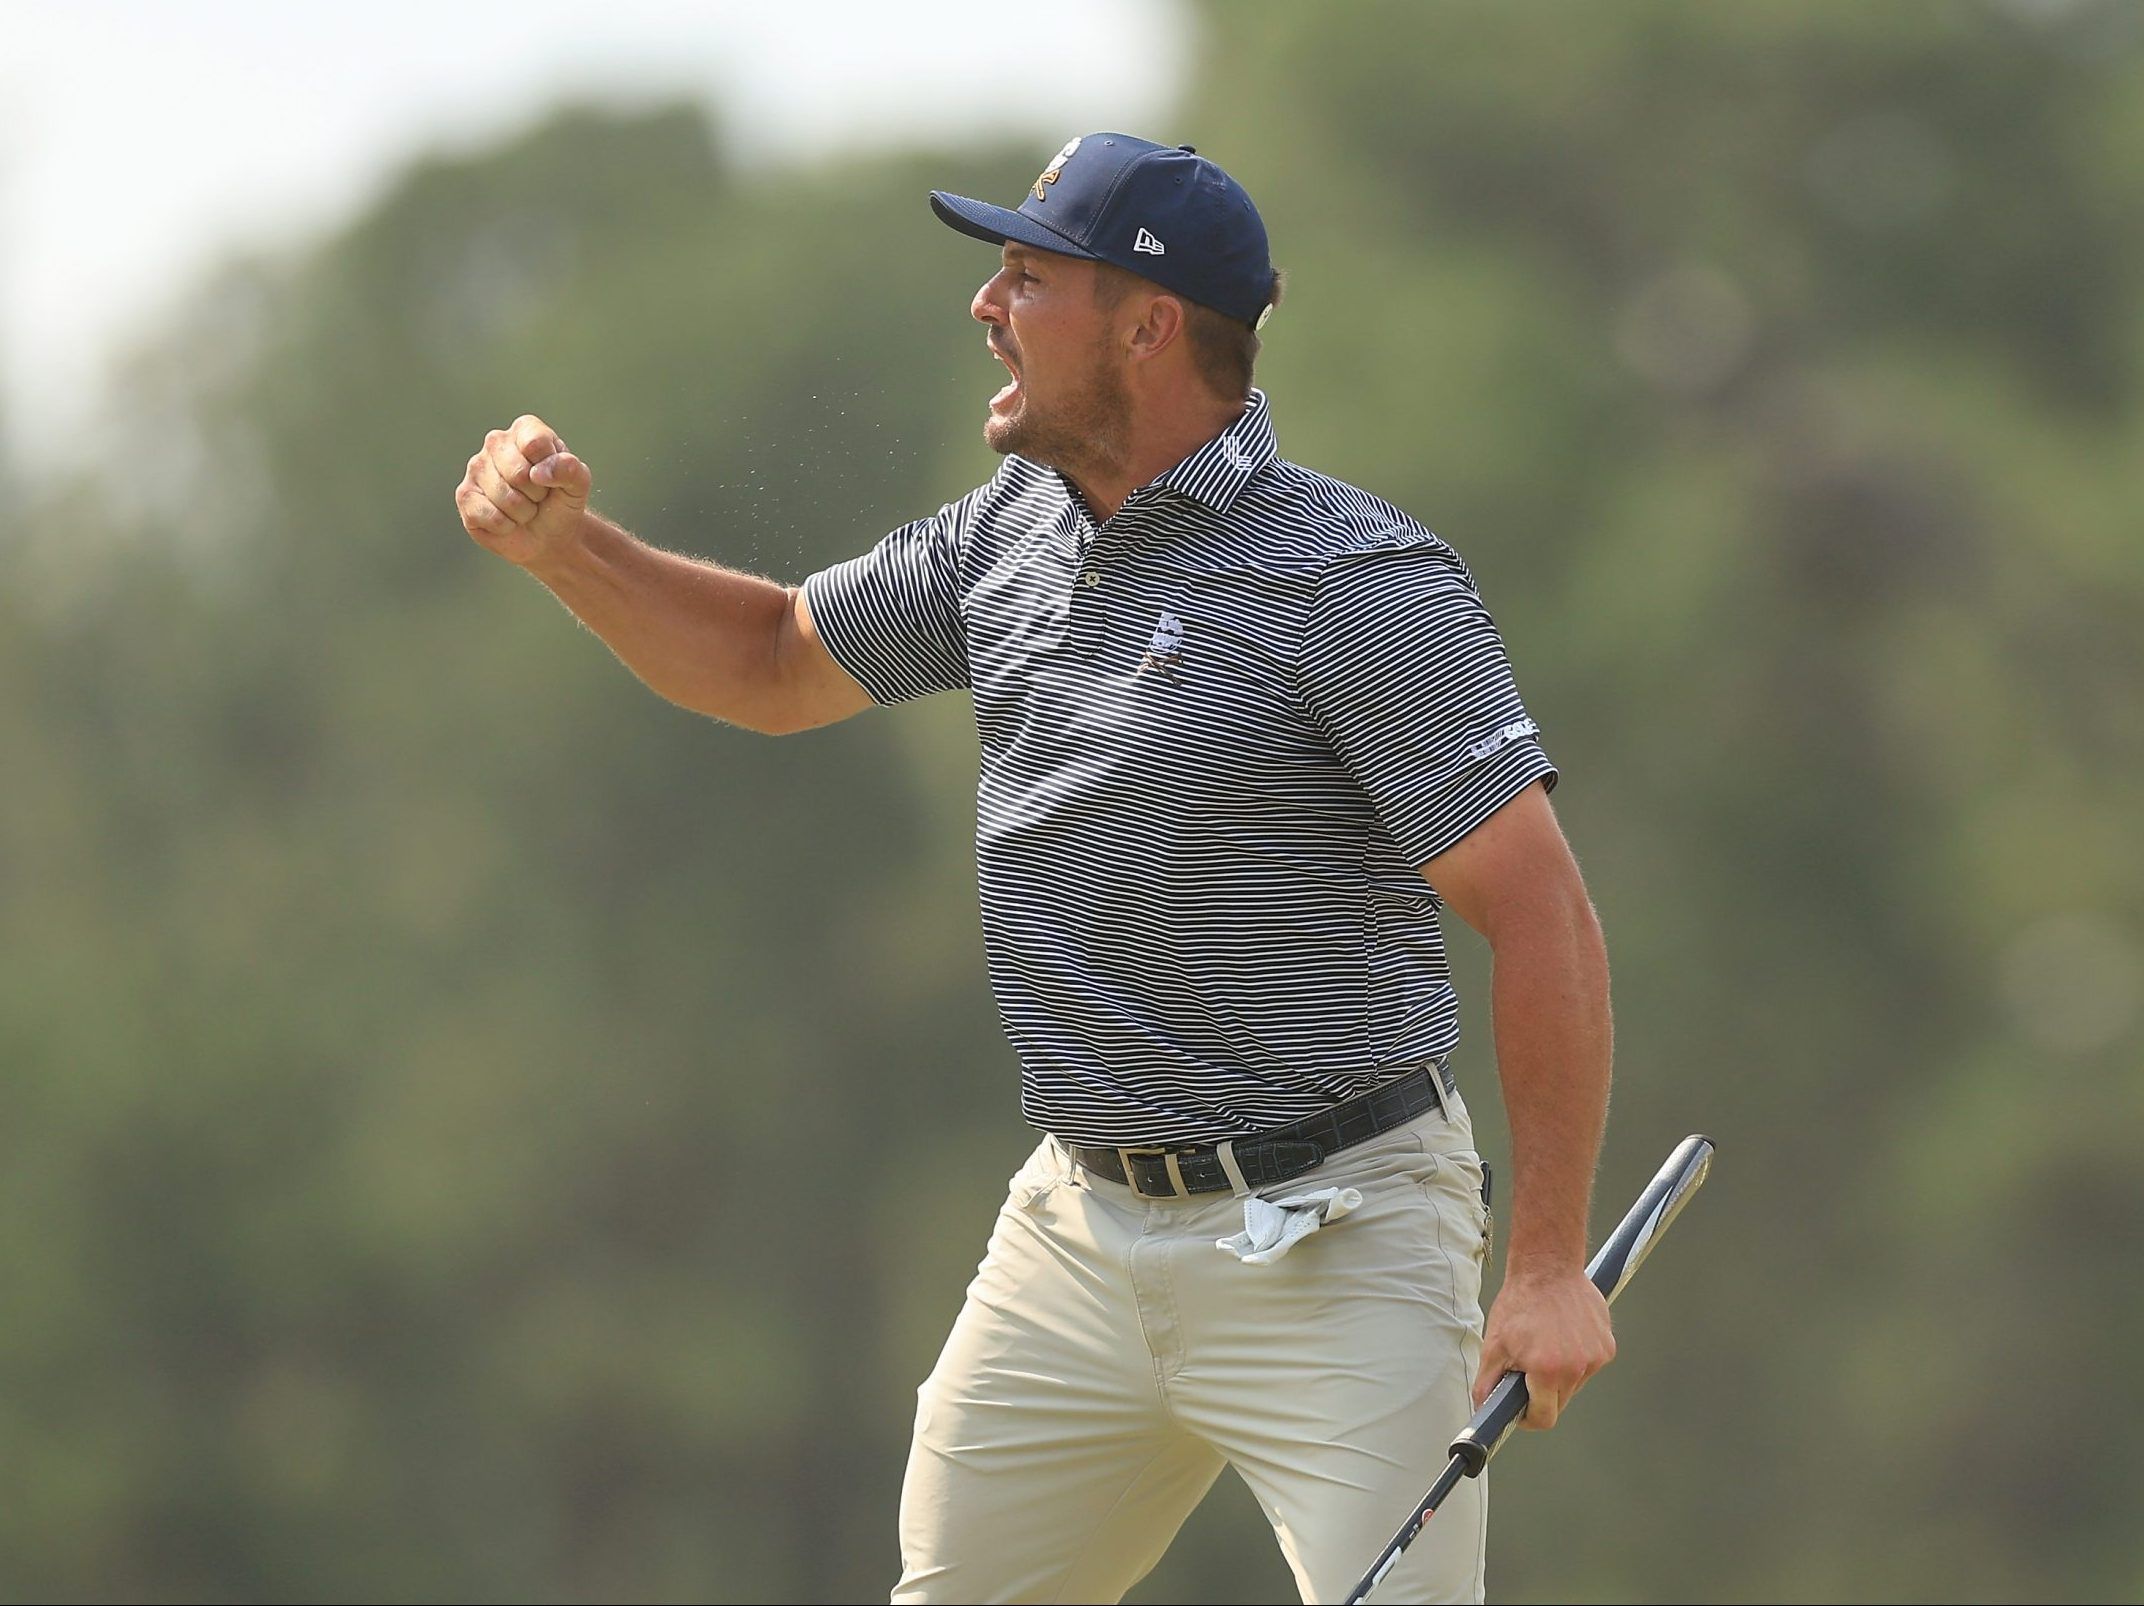 Bryson DeChambeau wins shocking U.S. Open as Rory McIlroy misses two short putts